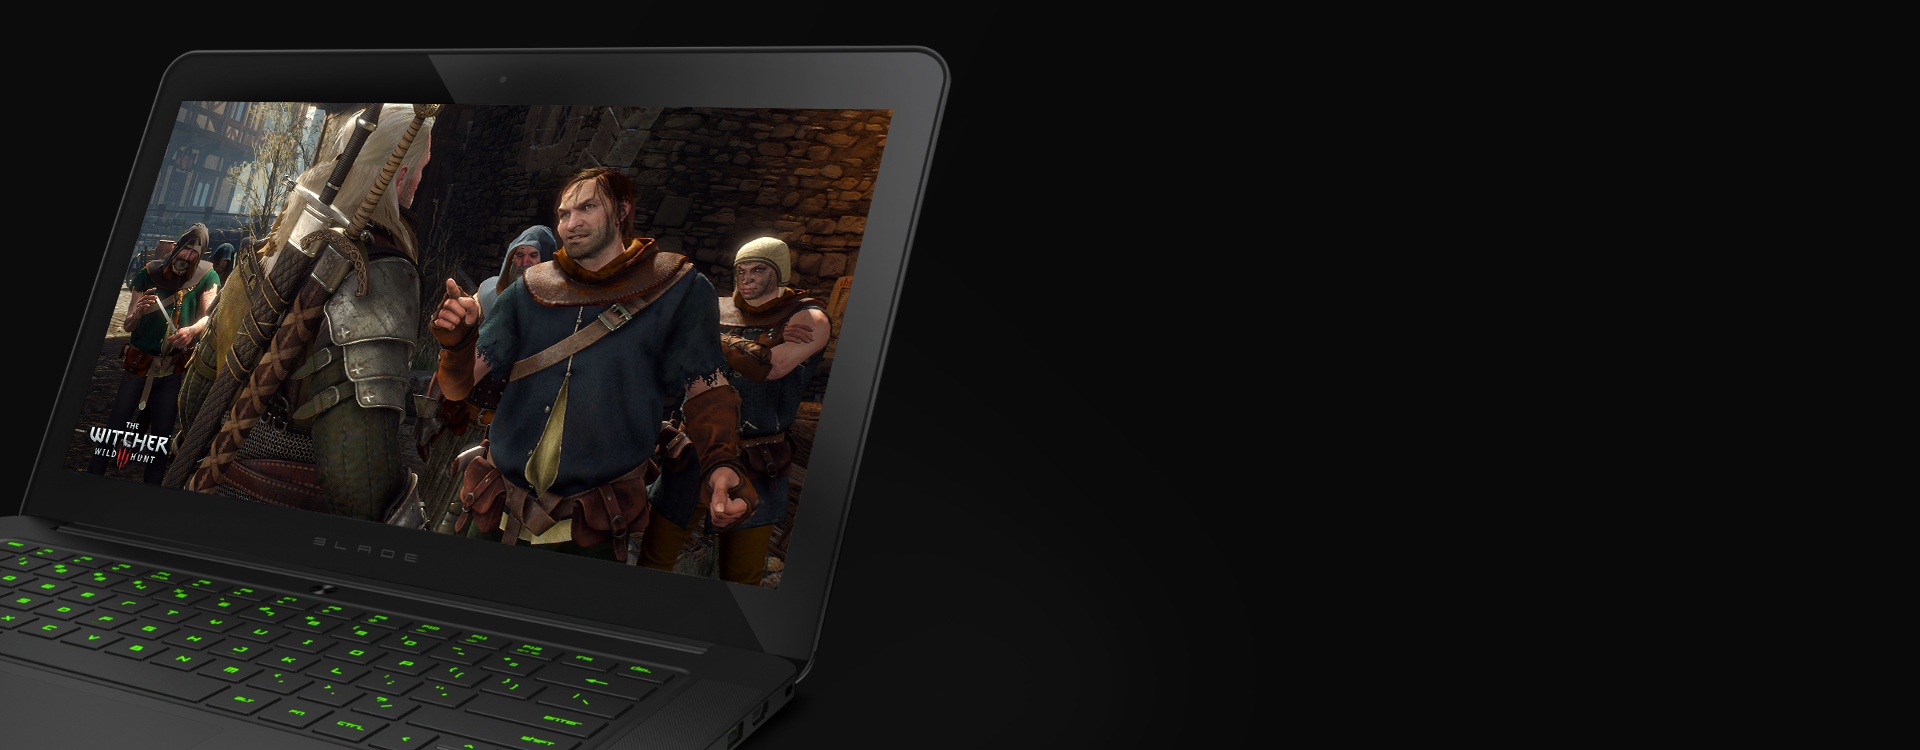 The New Razer Blade Gaming Laptop Now Available In QHD Or Full HD